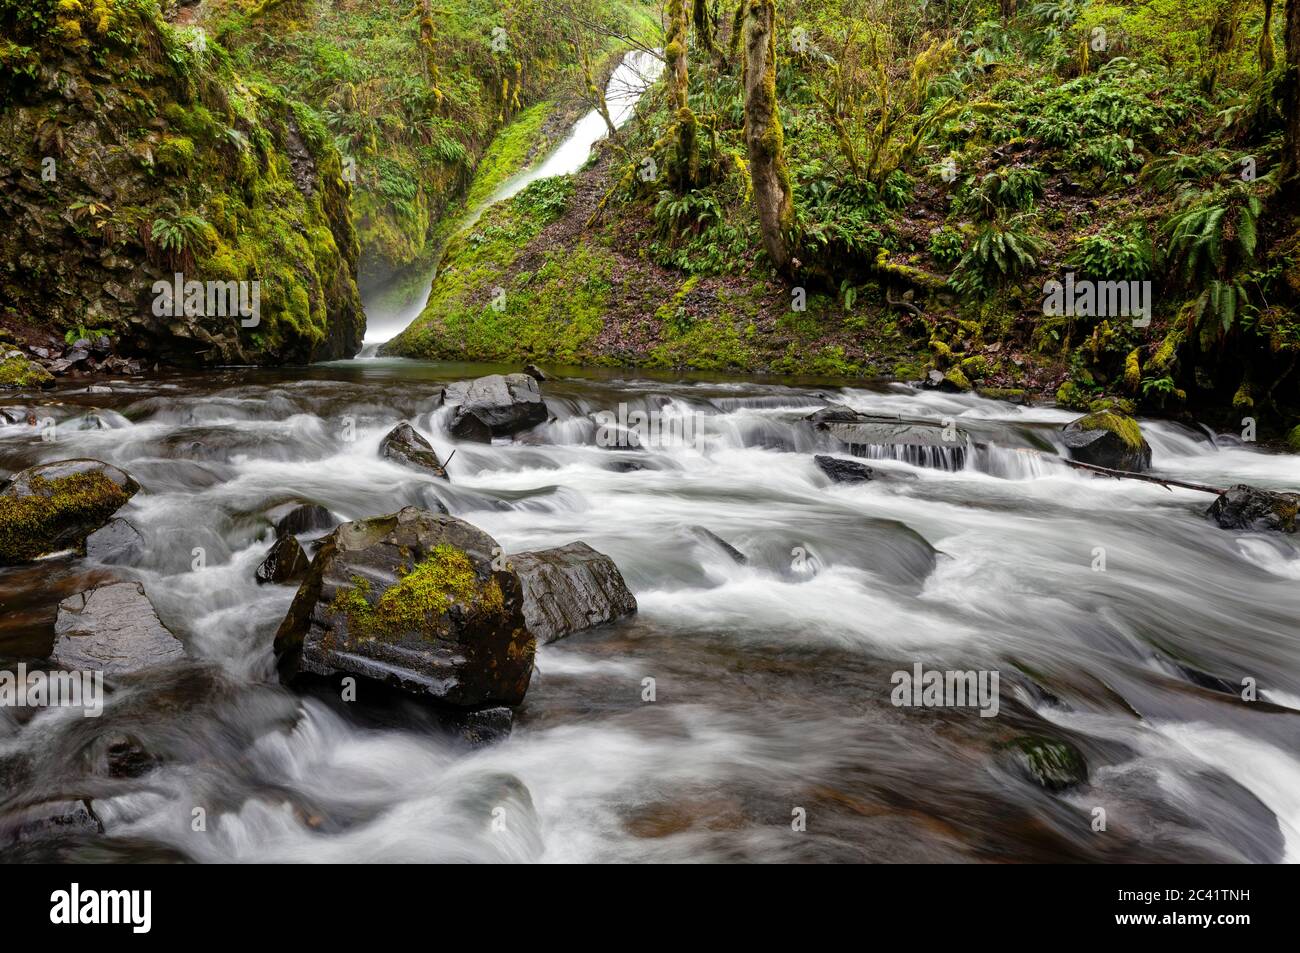 OR02564-00...OREGON - Bridal Viel Falls and Bridal Veil Creek in the Columbia River George National Scenic Area. Stock Photo